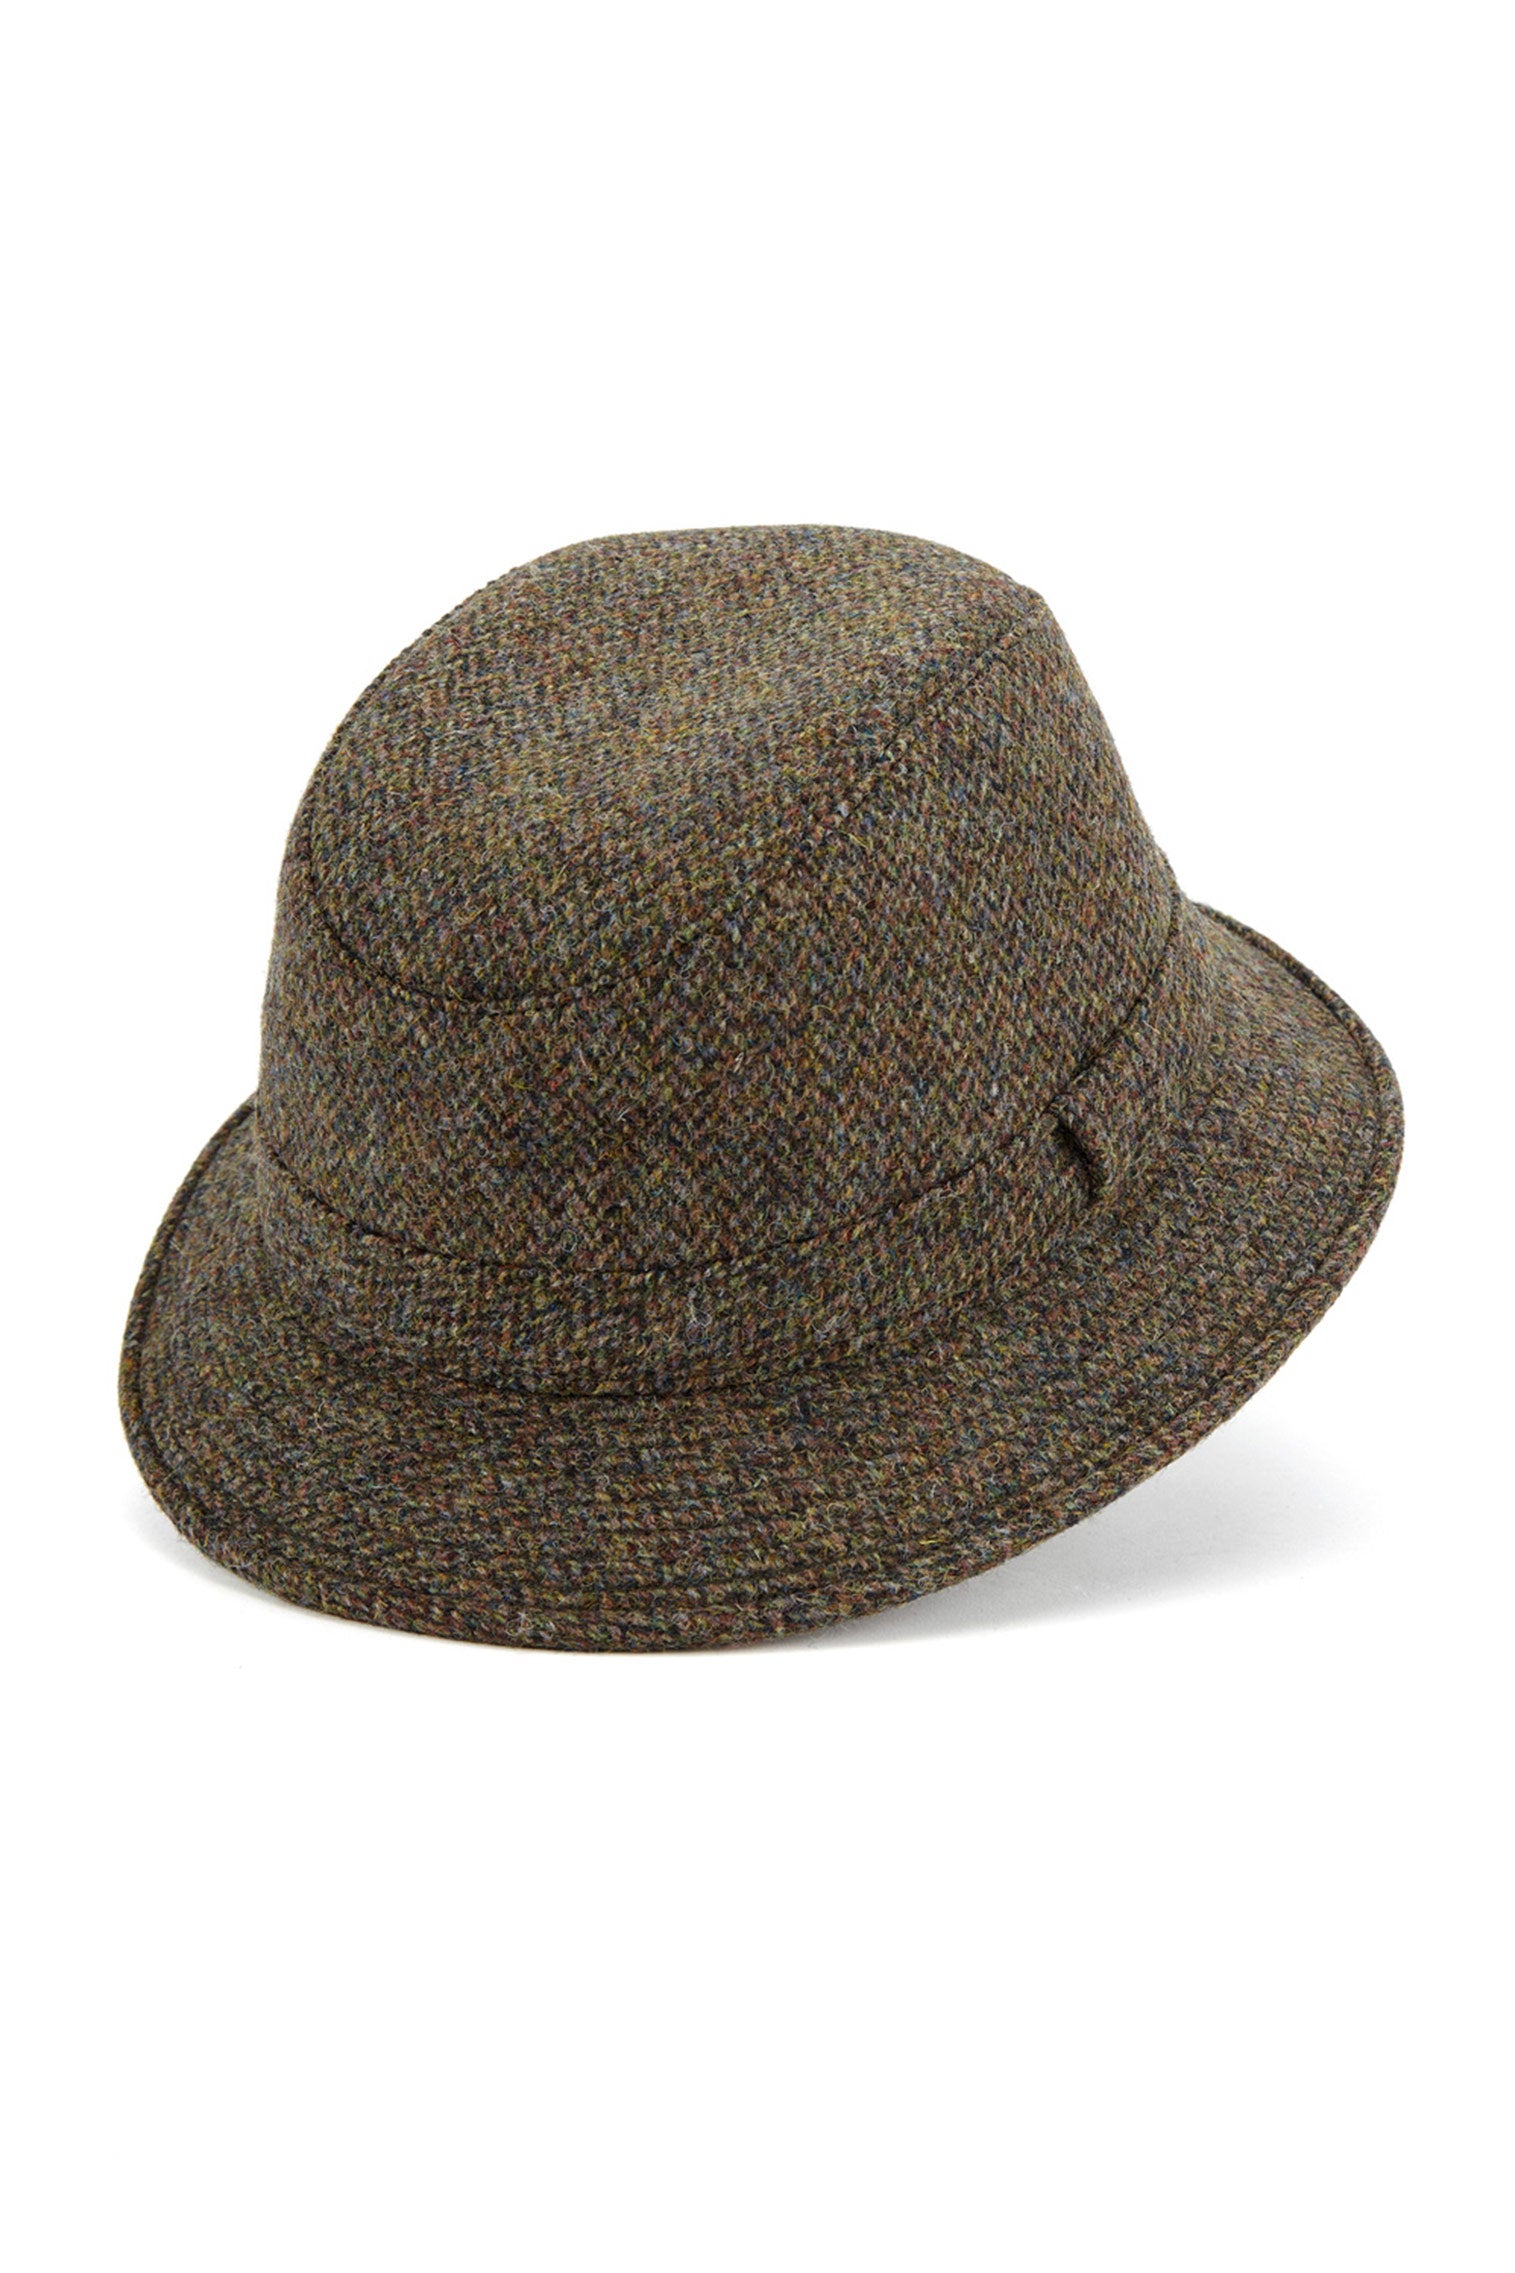 Grouse Tweed Rollable Hat - Packable & Rollable Hats - Lock & Co. Hatters London UK